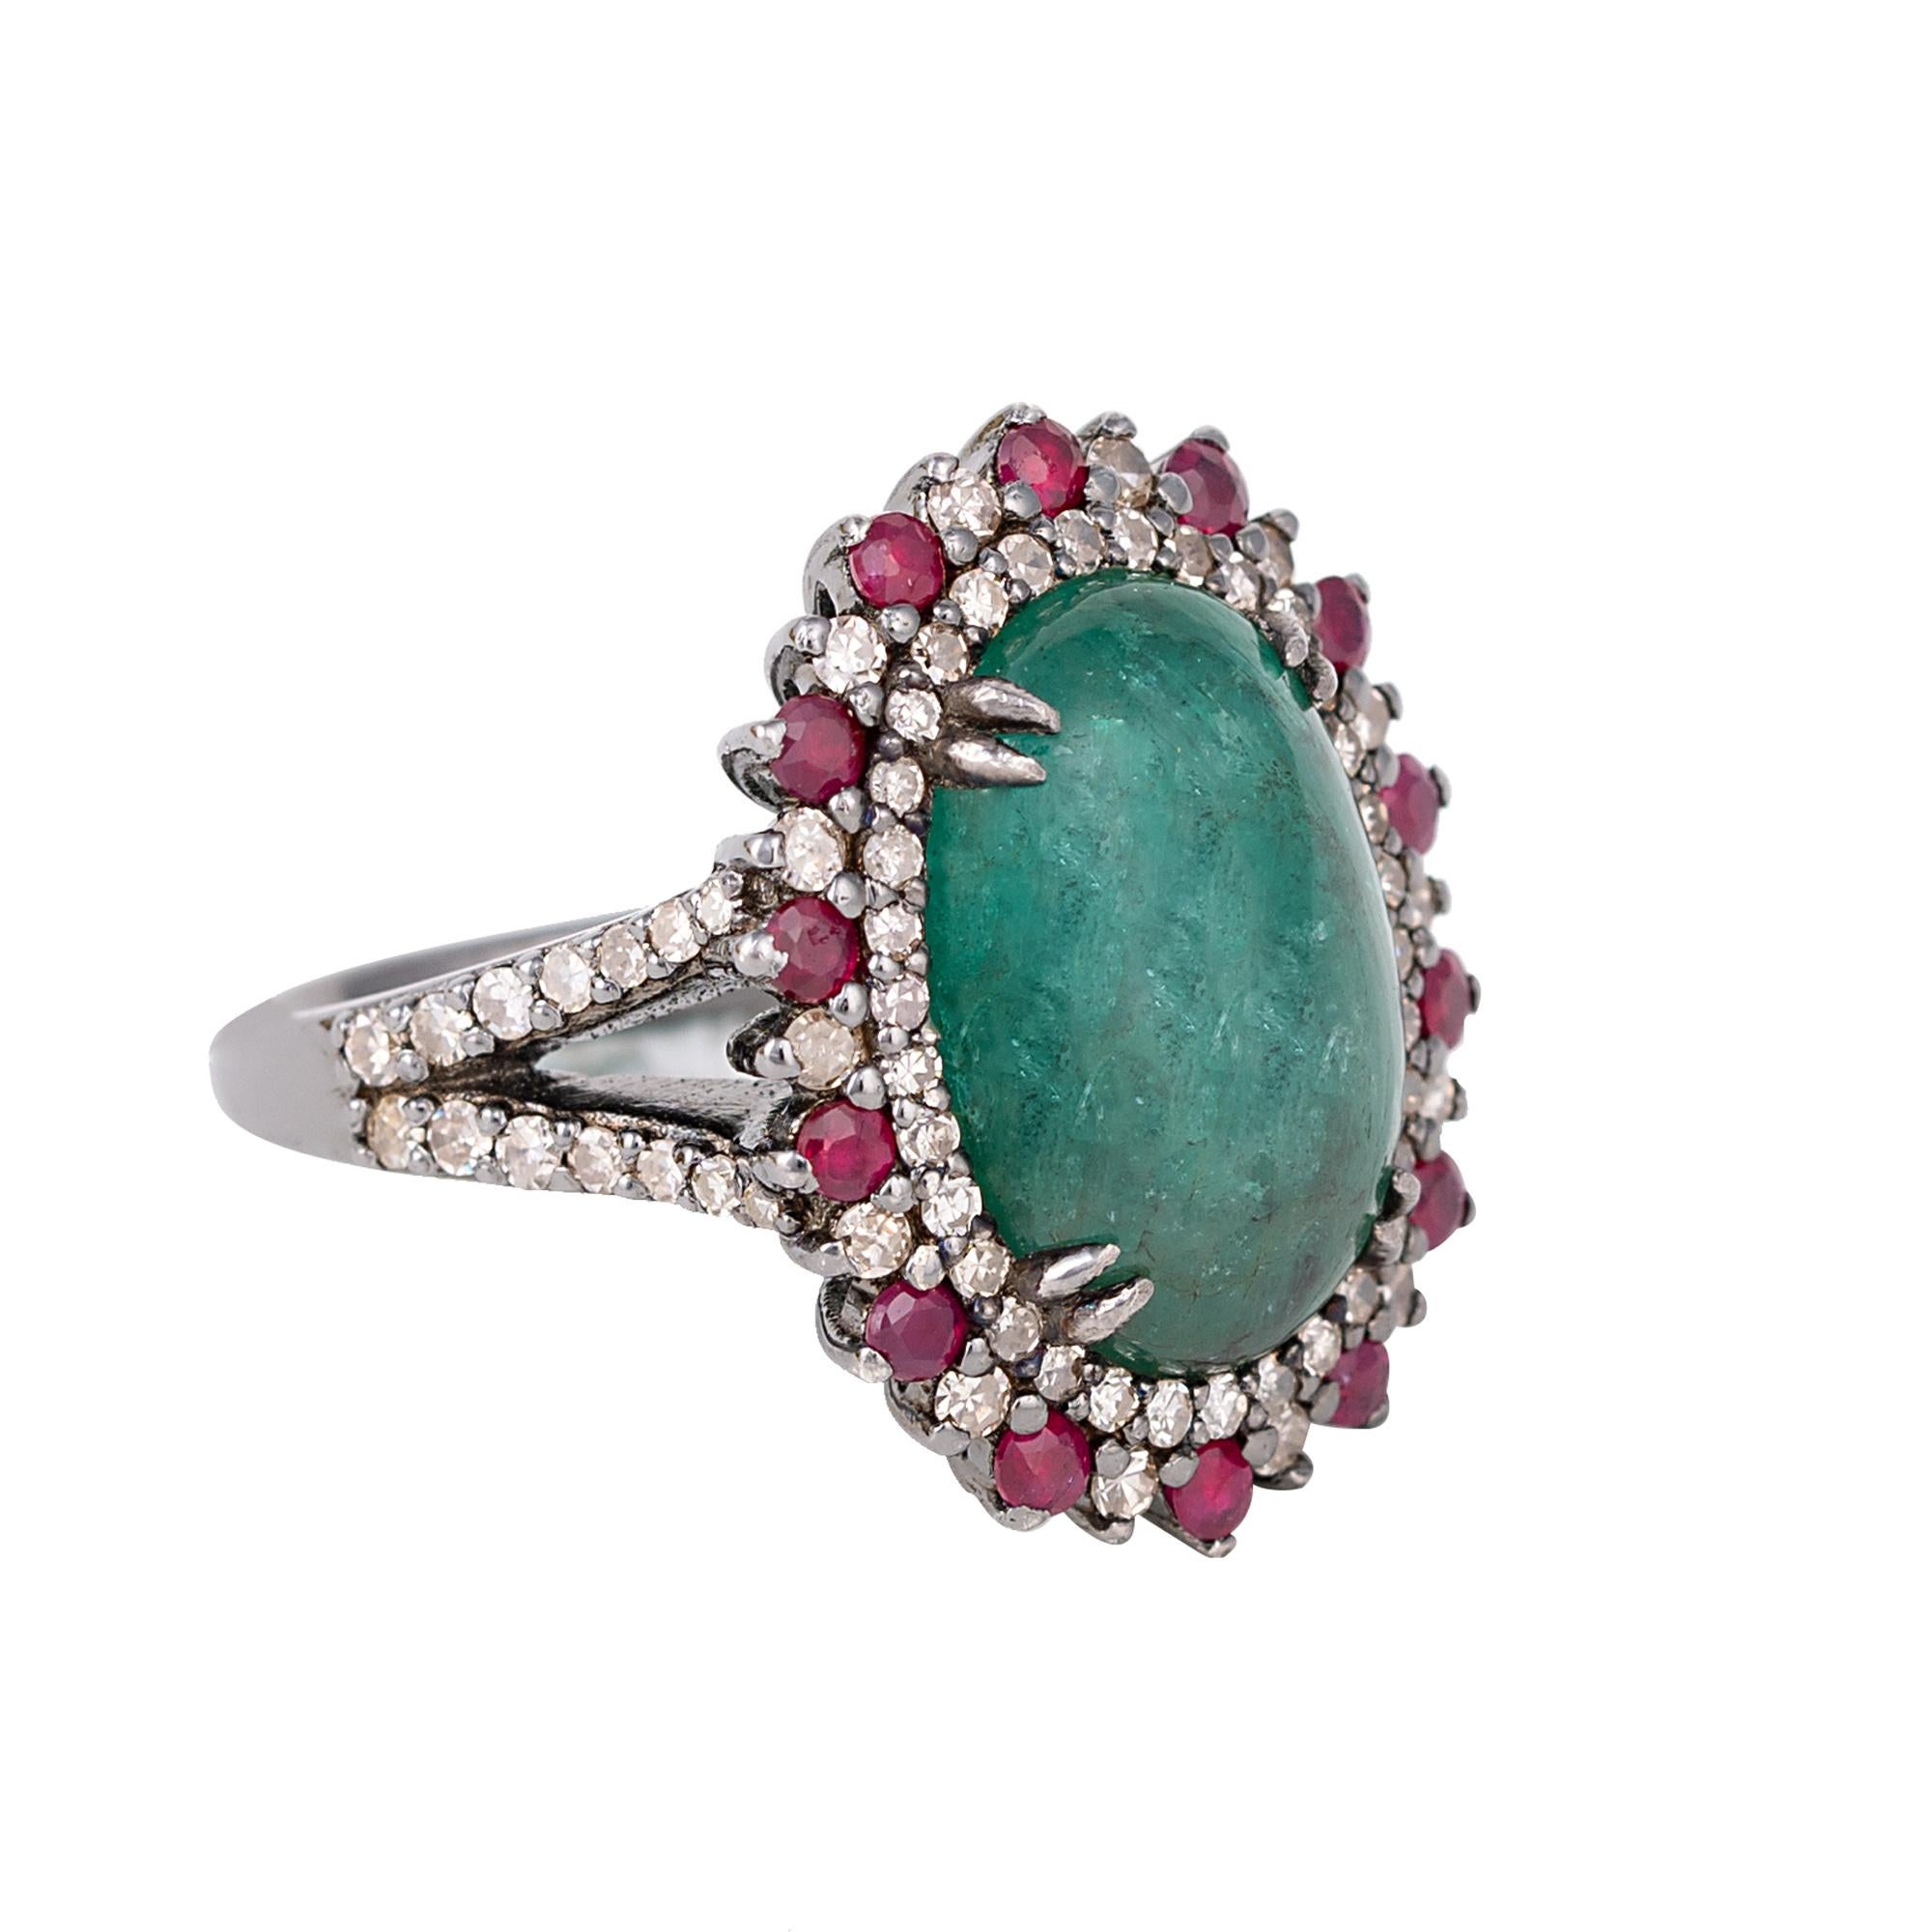 7.70 Carat Cabochon-Cut Emerald, Diamond, and Ruby Cocktail Ring in Art-Deco Style

This Victorian era art-deco style enchanting forest green emerald, brick red ruby and diamond ring is ravishing. The solitaire oval emerald cabochon in double-eagle